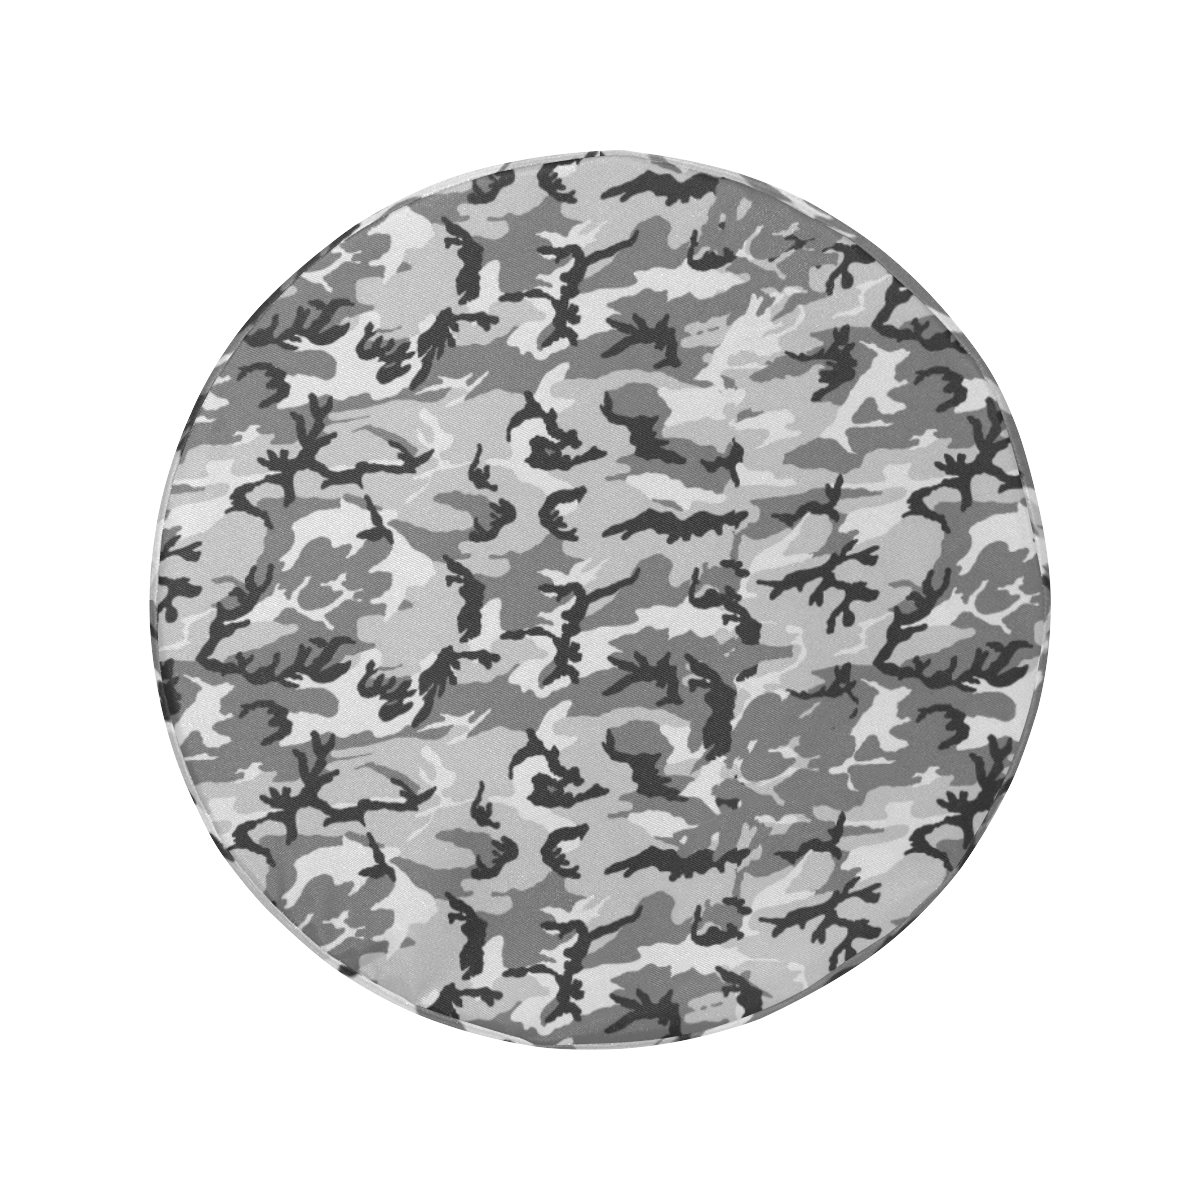 Woodland Urban City Black/Gray Camouflage 34 Inch Spare Tire Cover